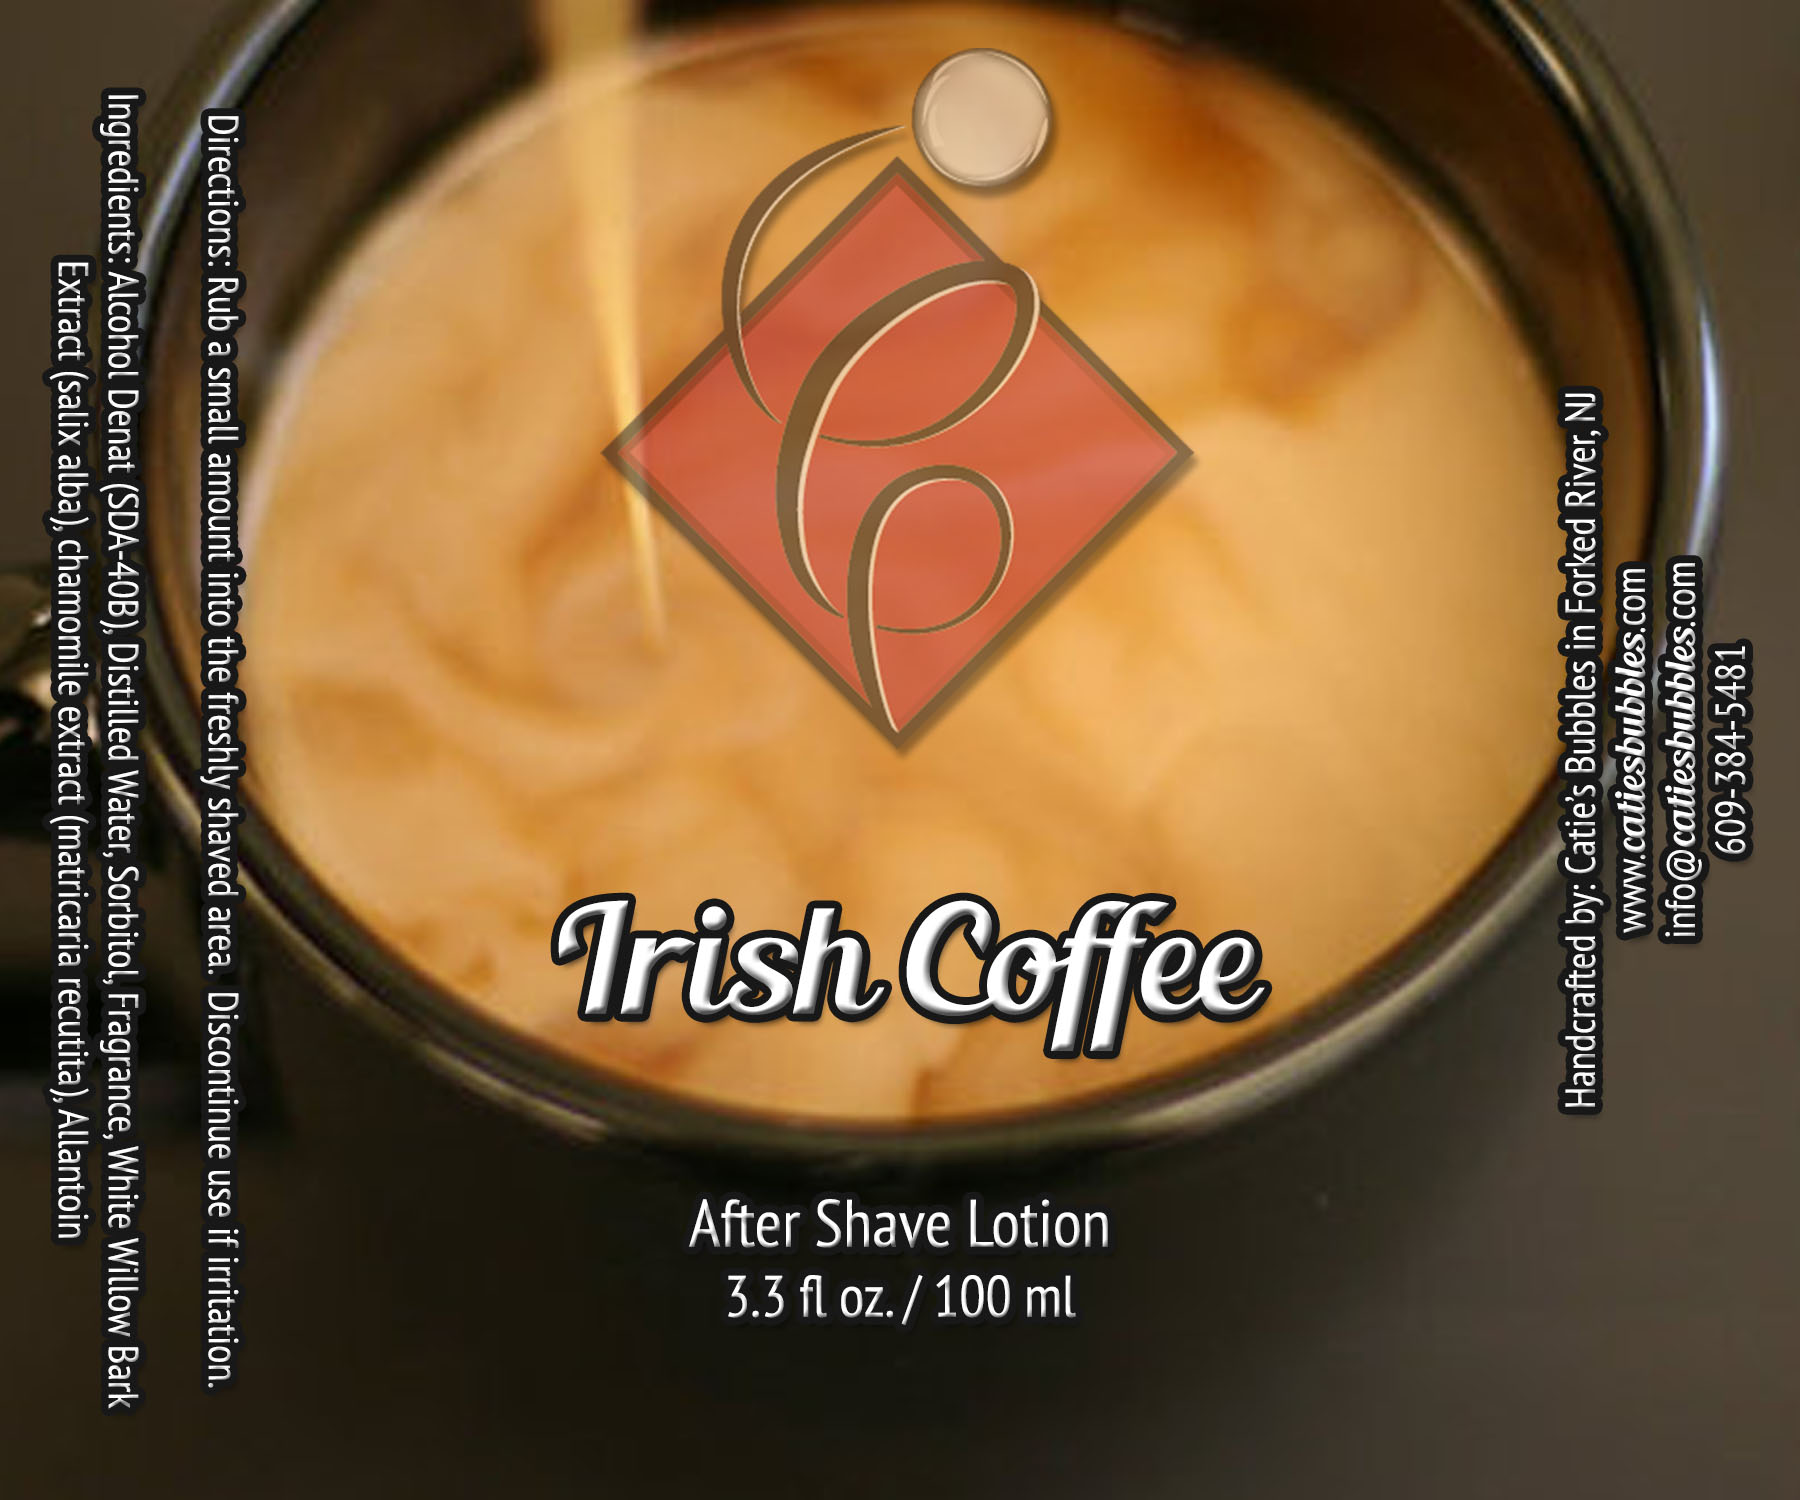 Irish Coffee After Shave Lotion